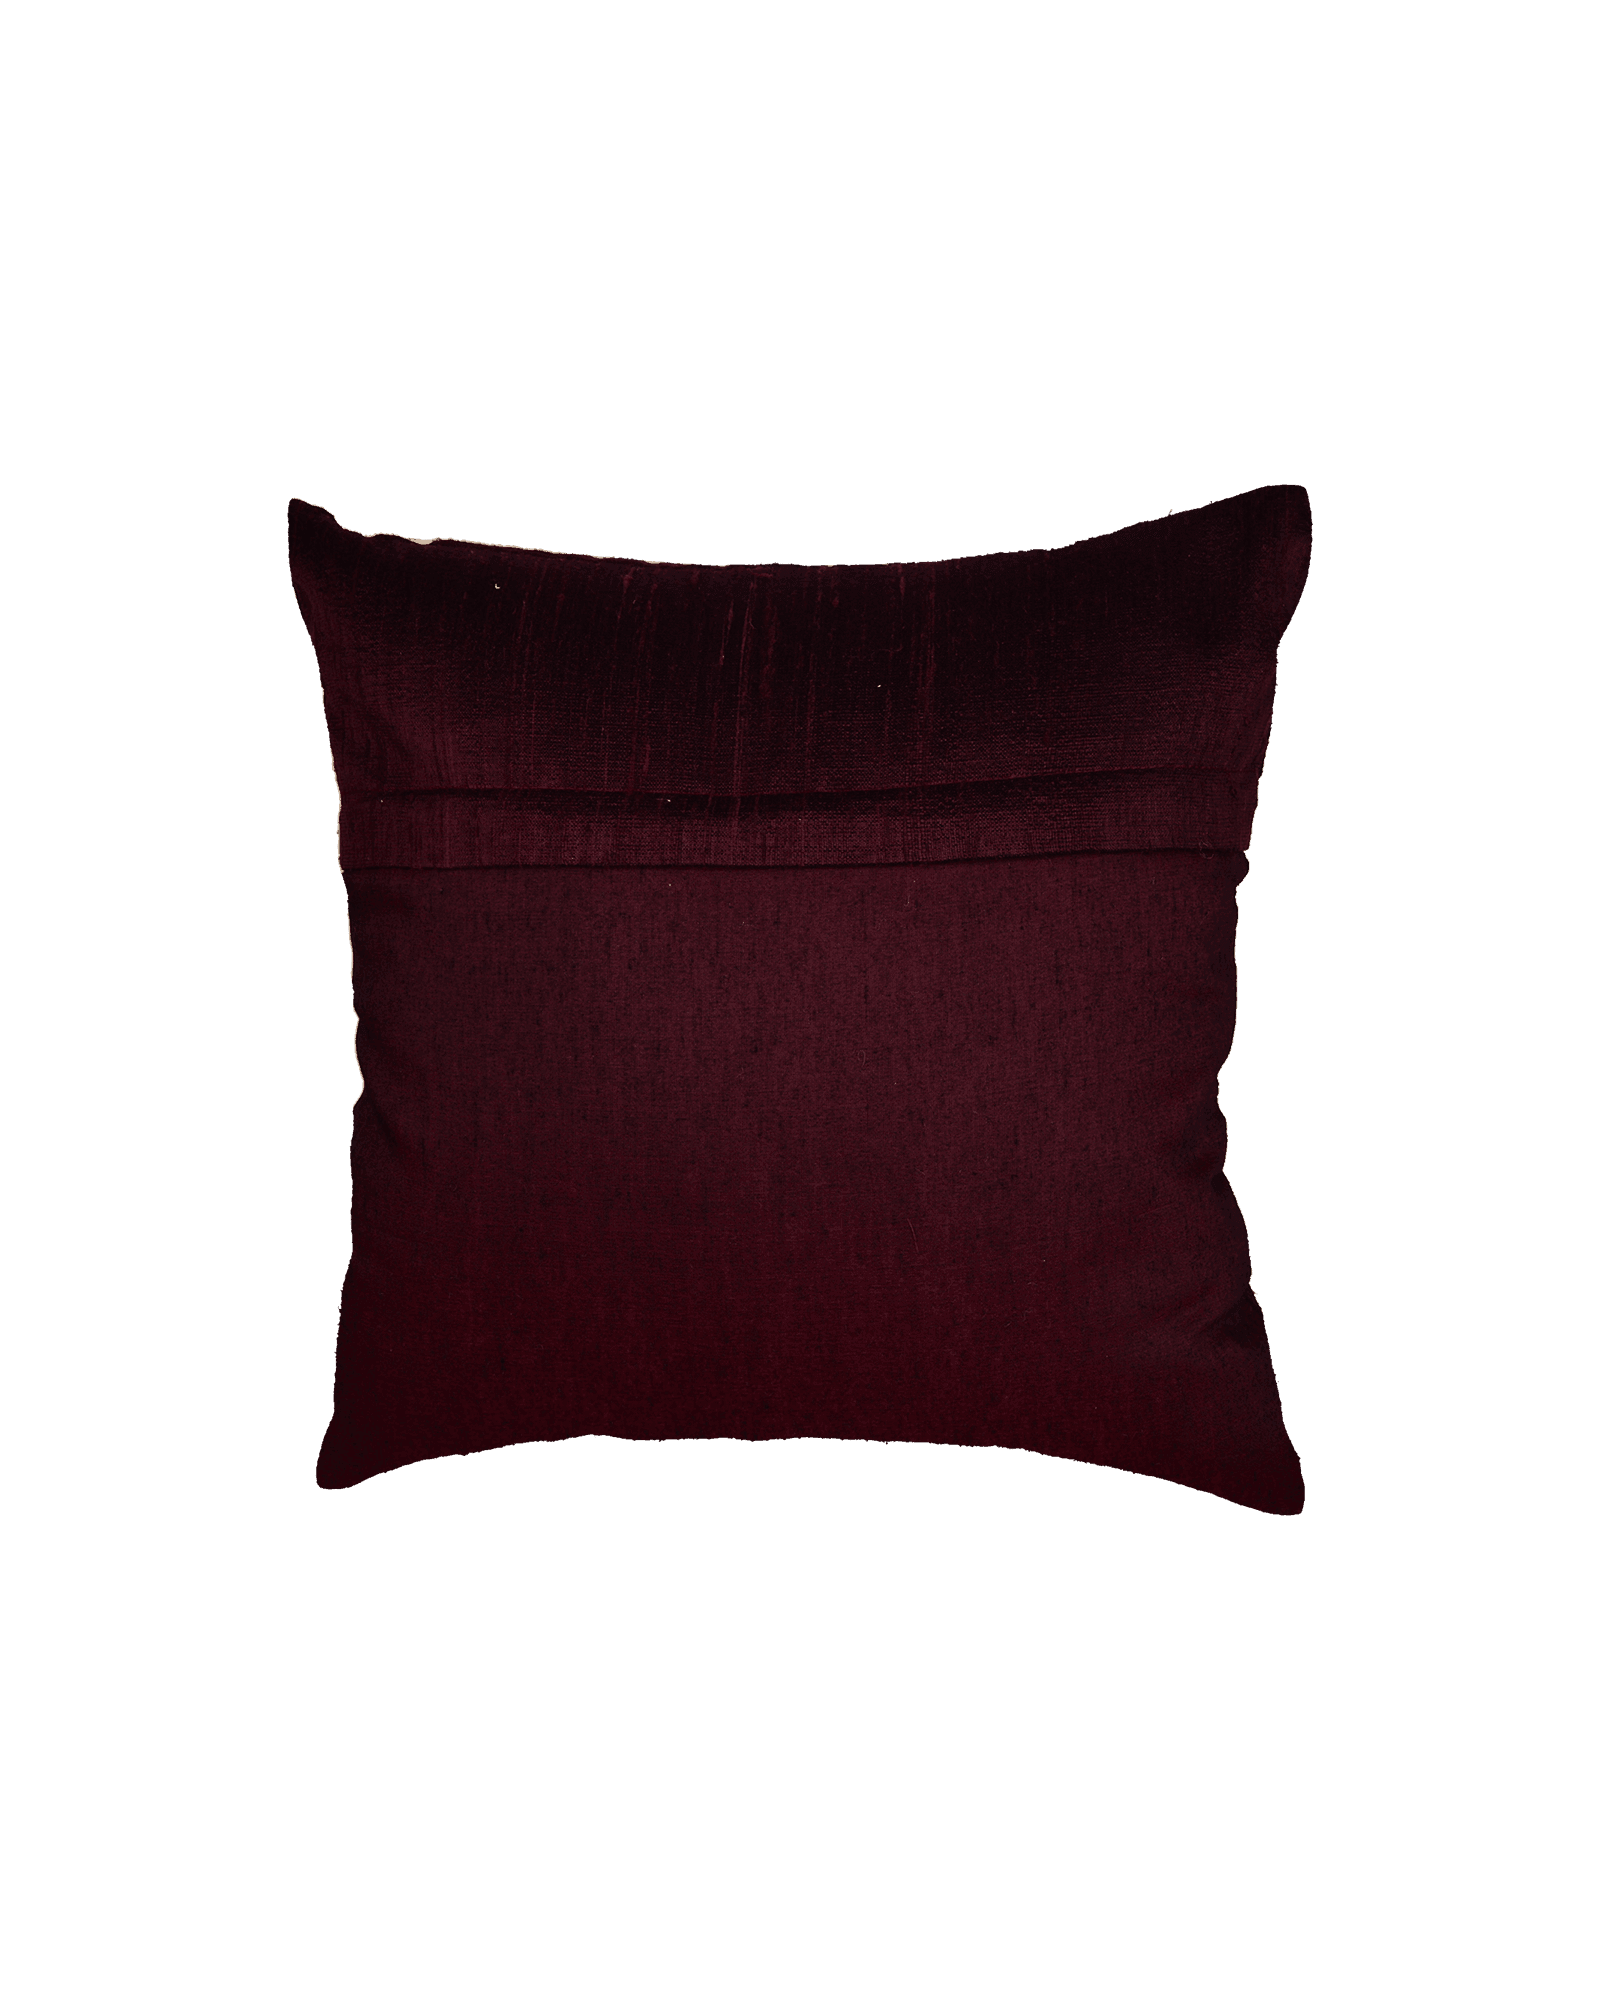 Mahogany Premium Hand-embroidered Raw Silk Centrepiece Cushion Cover 16" - By HolyWeaves, Benares